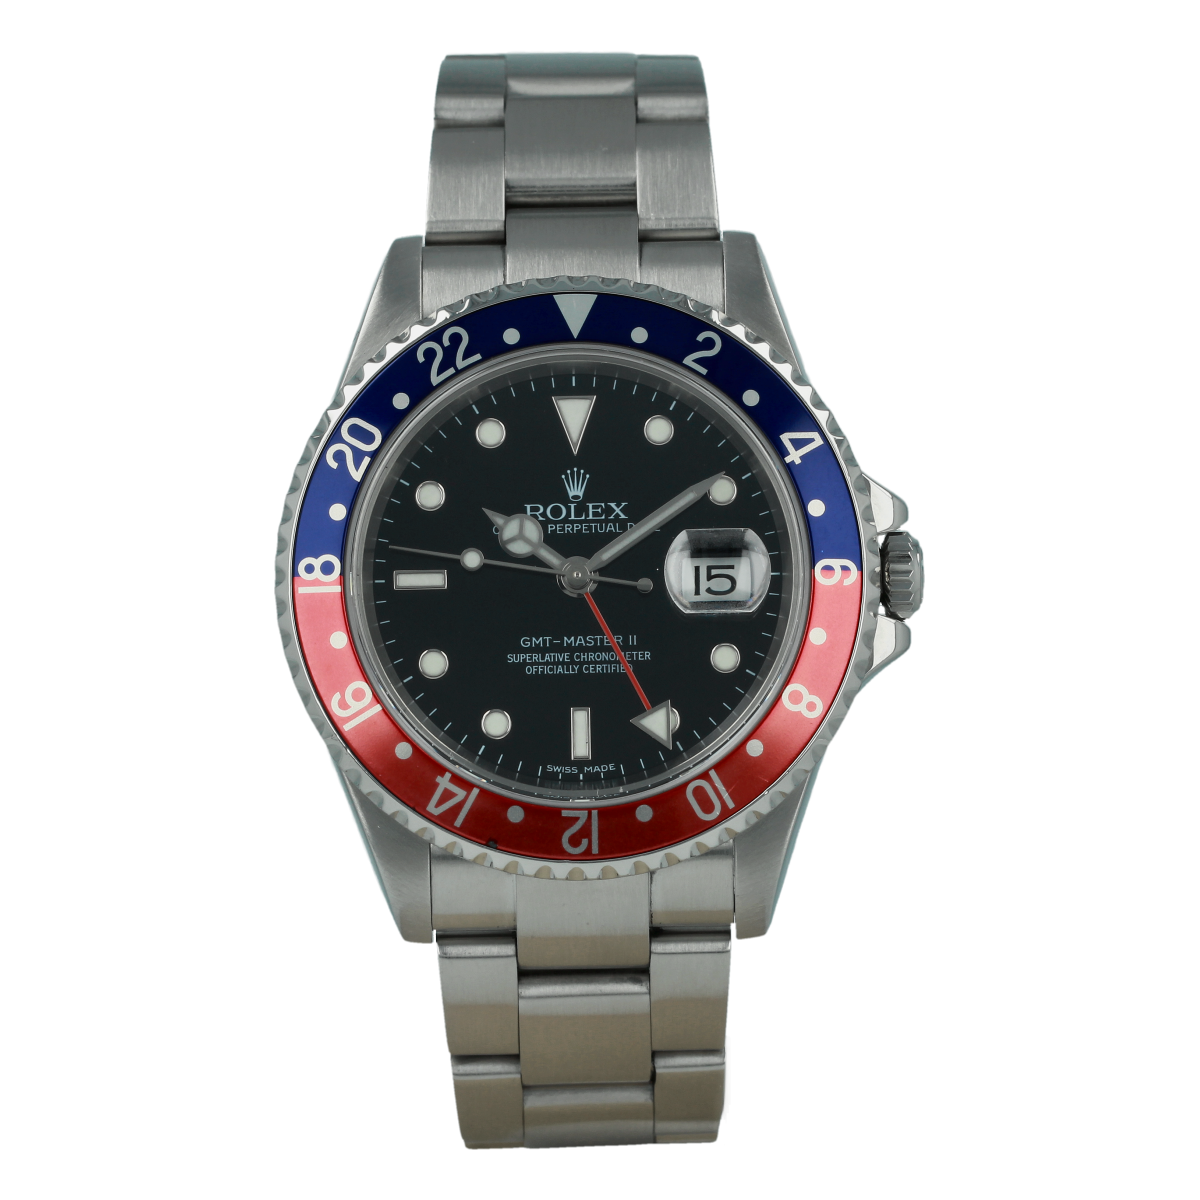 Rolex GMT-Master II 16710T "Stick | Buy pre-owned Rolex watch